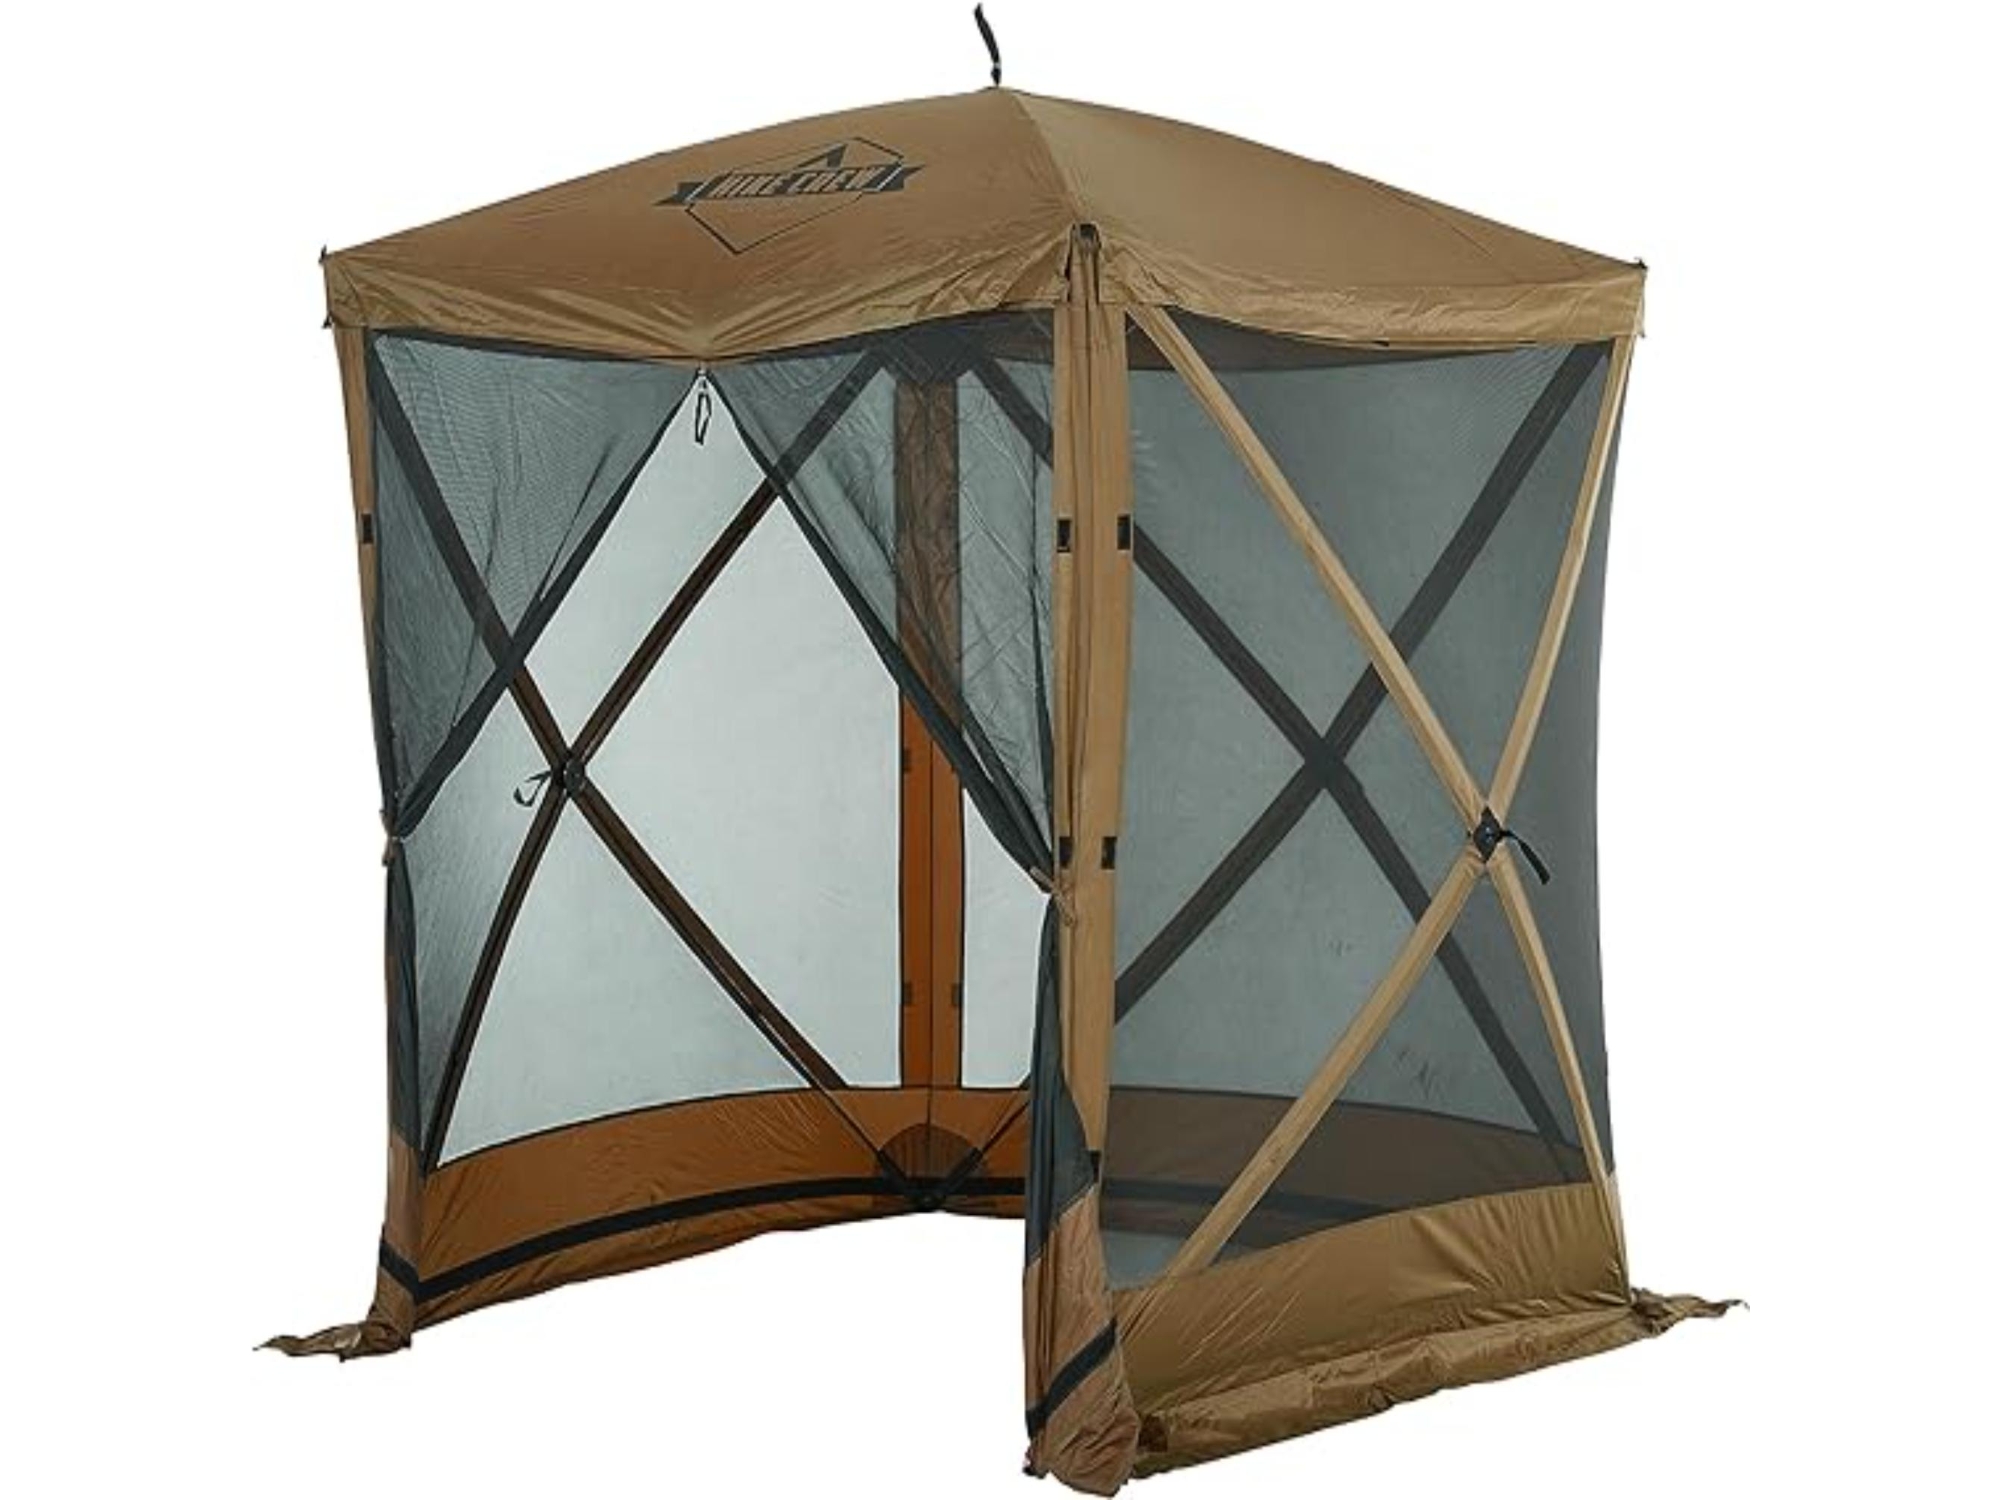 Hike Crew 6 x 6 Pop Up Gazebo Tent, 4-Sided Outdoor Tent Canopy, Brown